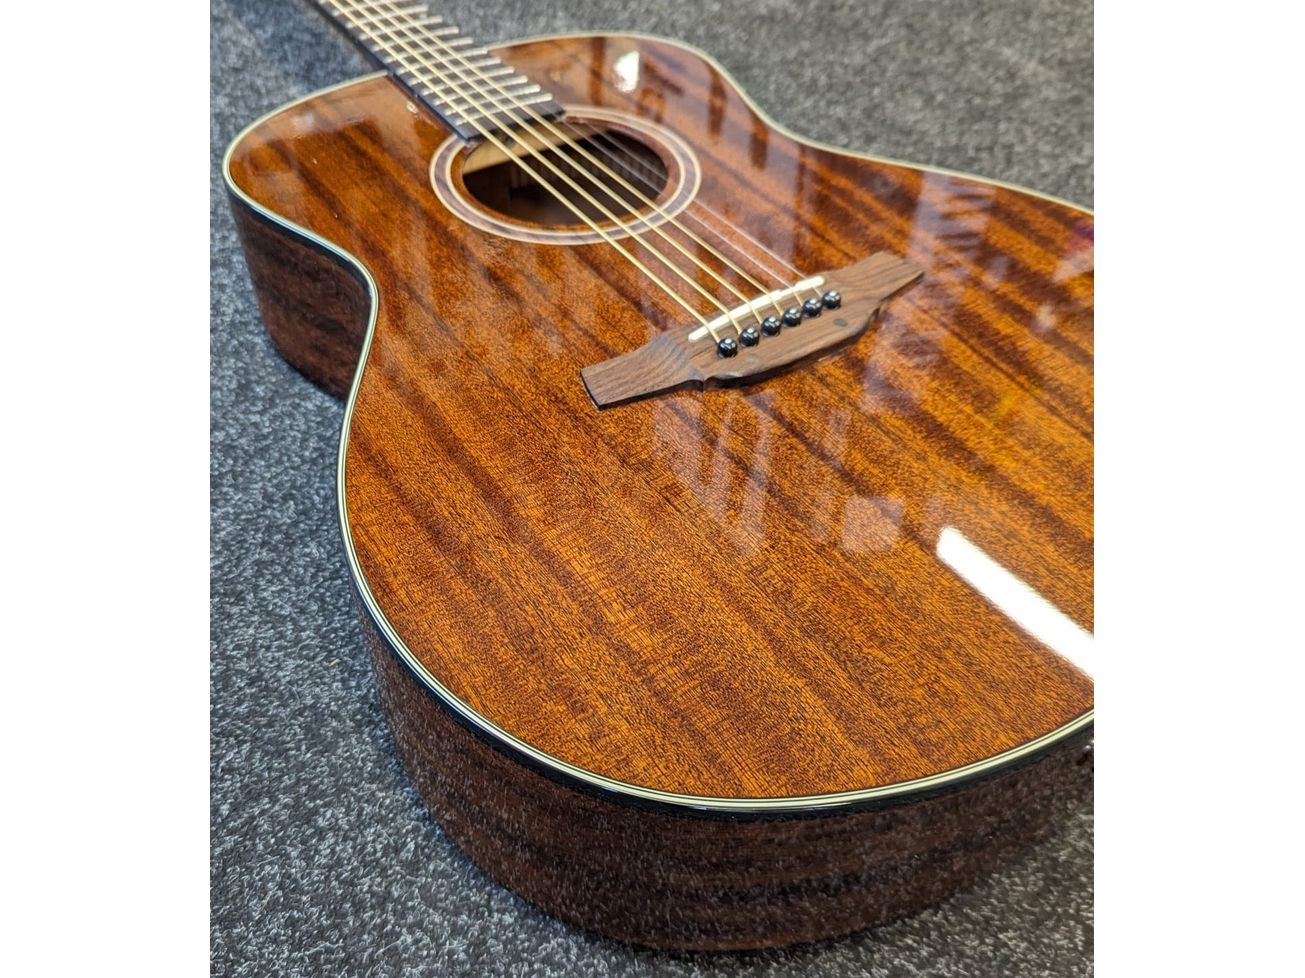 Crafter HT-250 Orchestra Acoustic Guitar in Mahogany